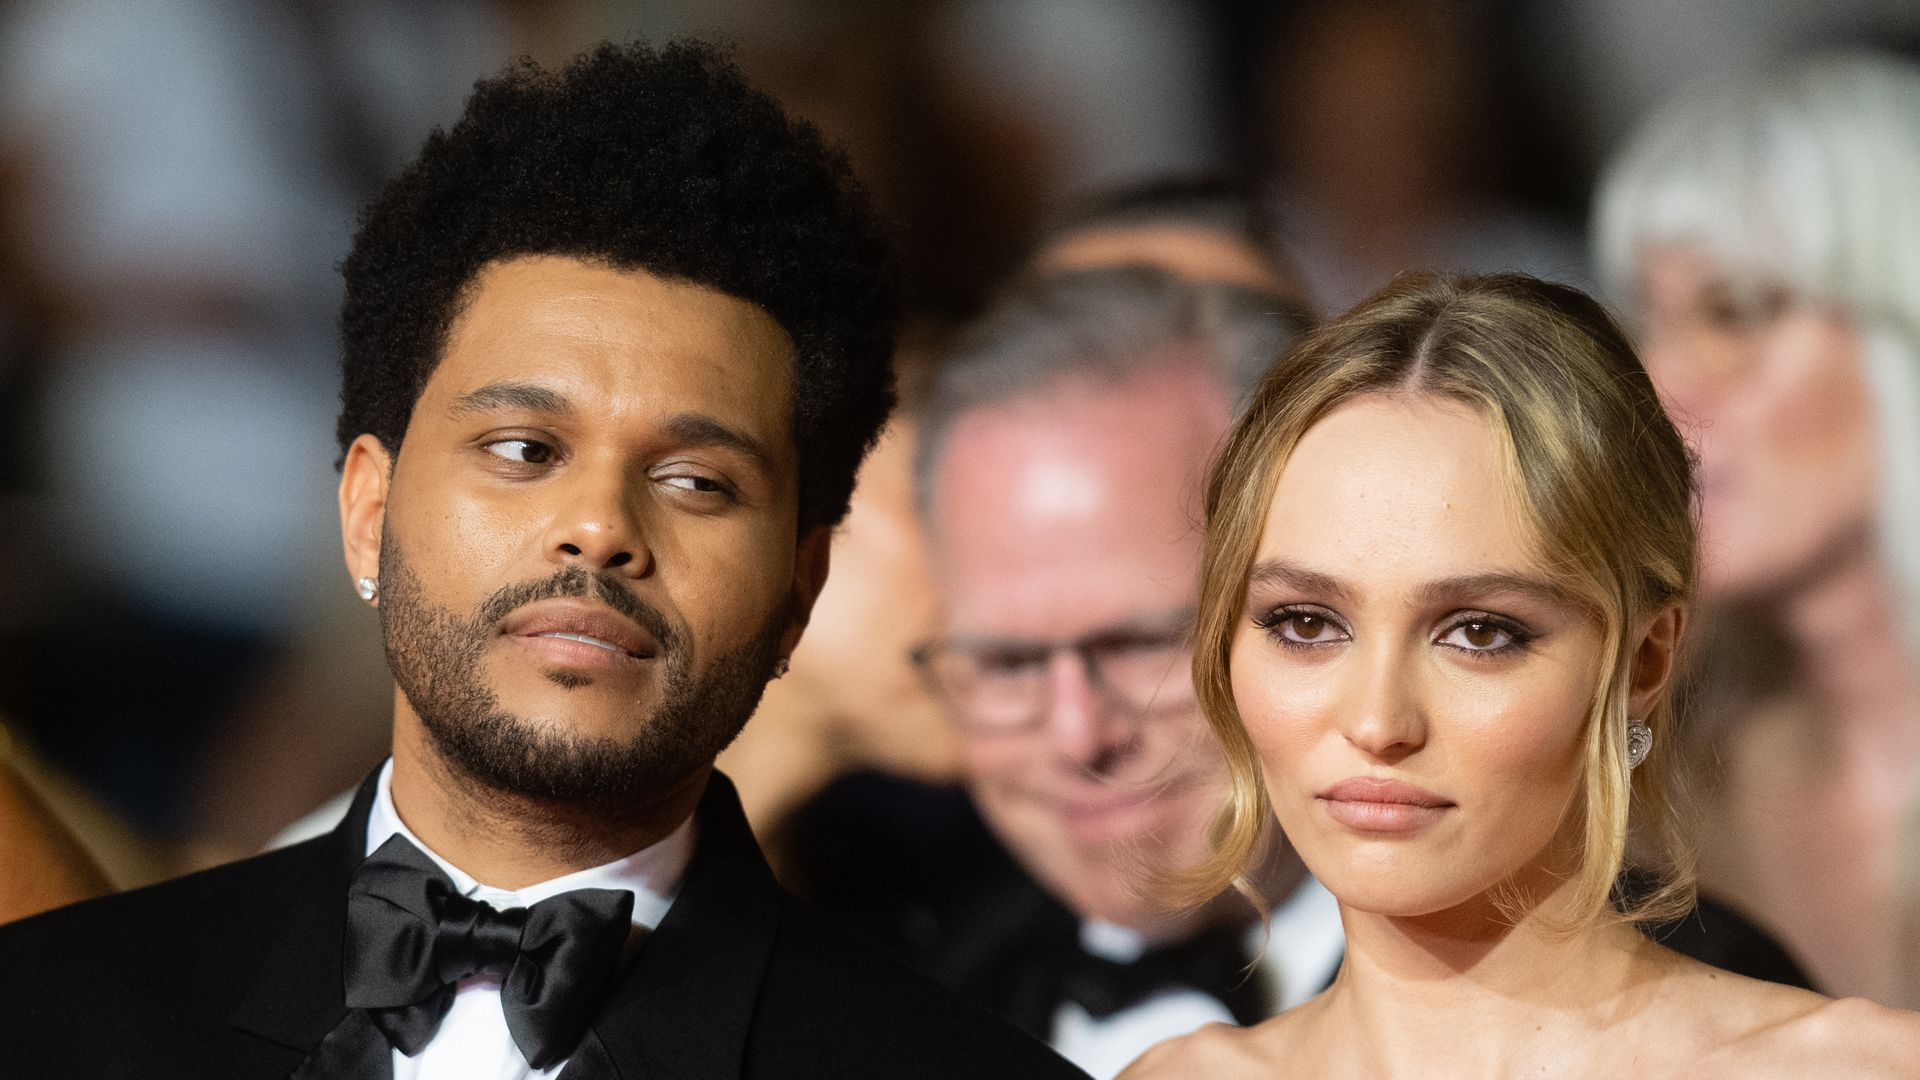 Co-stars The Weeknd and Lily-Rose Depp looked elegant at the Cannes premiere of The Idol 